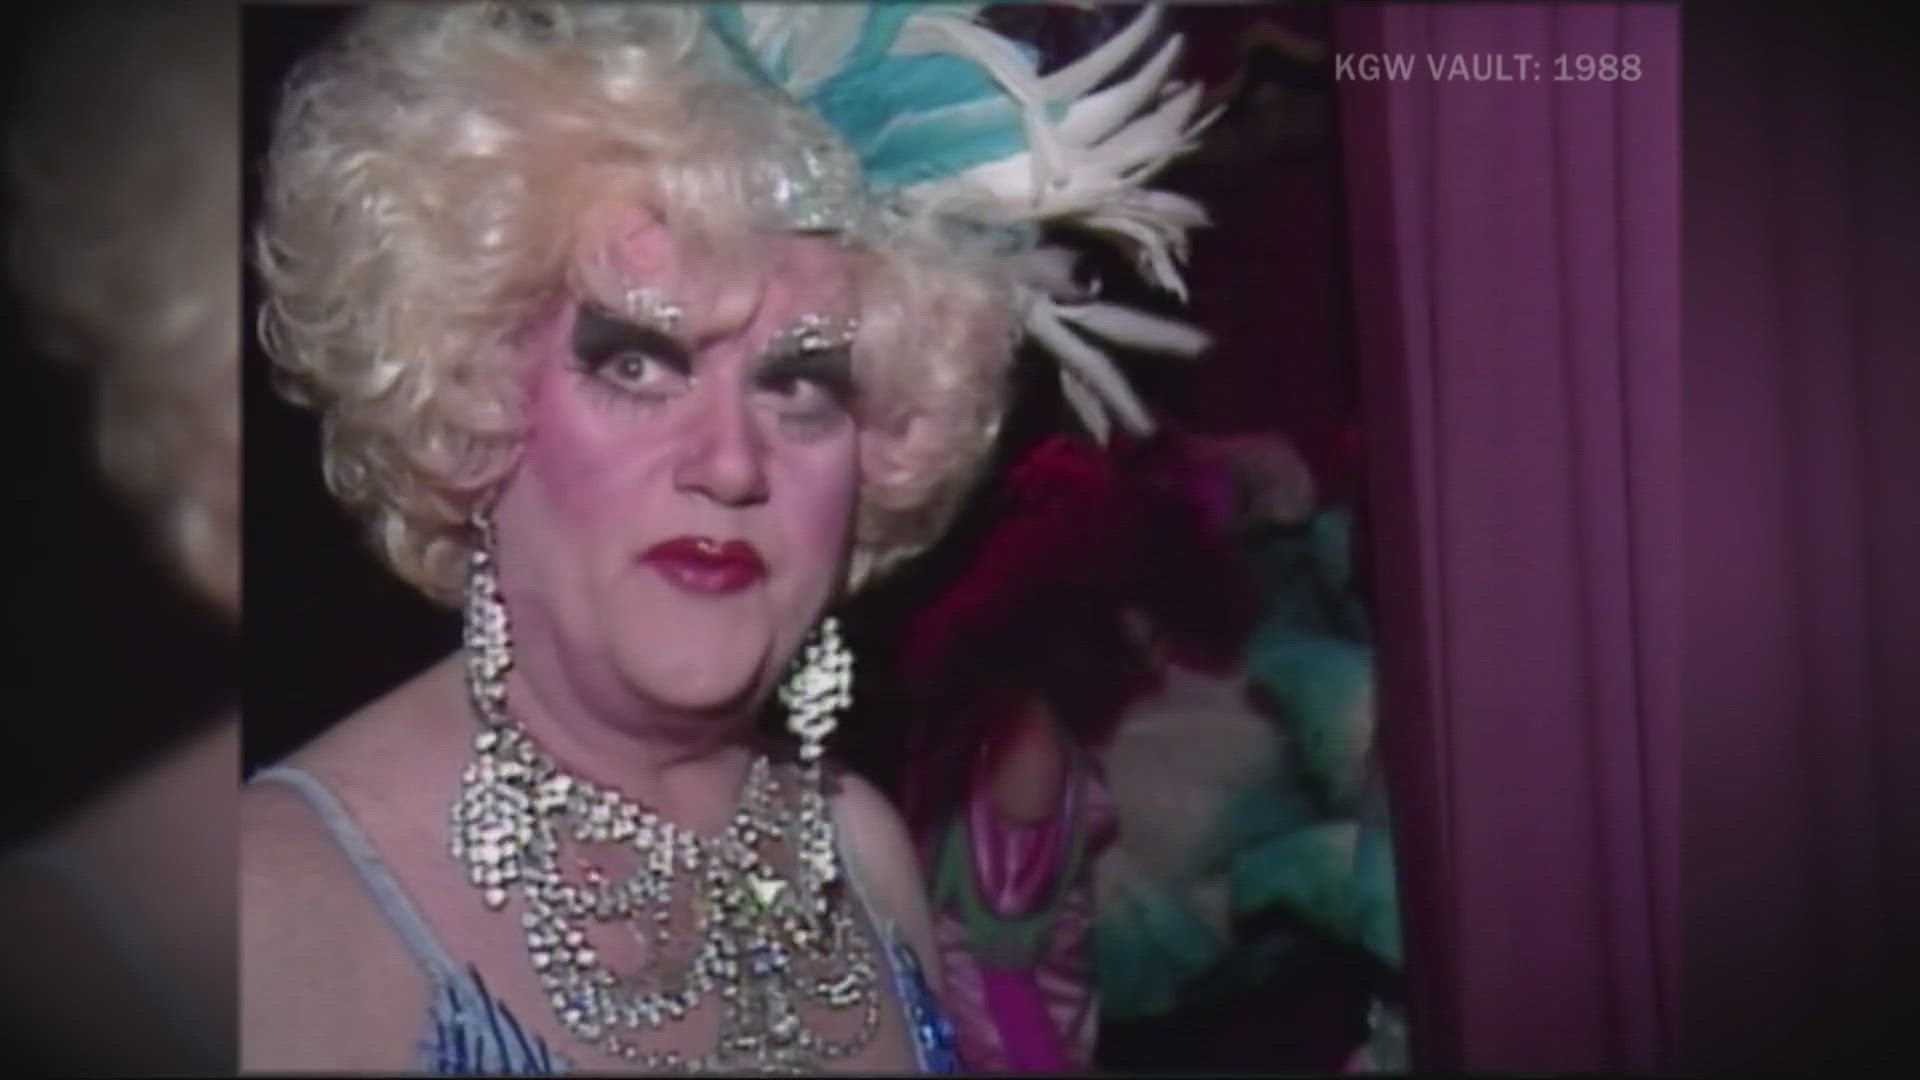 Darcelle launched the iconic drag cabaret "Darcelle XV Showplace" in downtown Portland after buying the building in 1967, opening doors for the LGBTQ community.